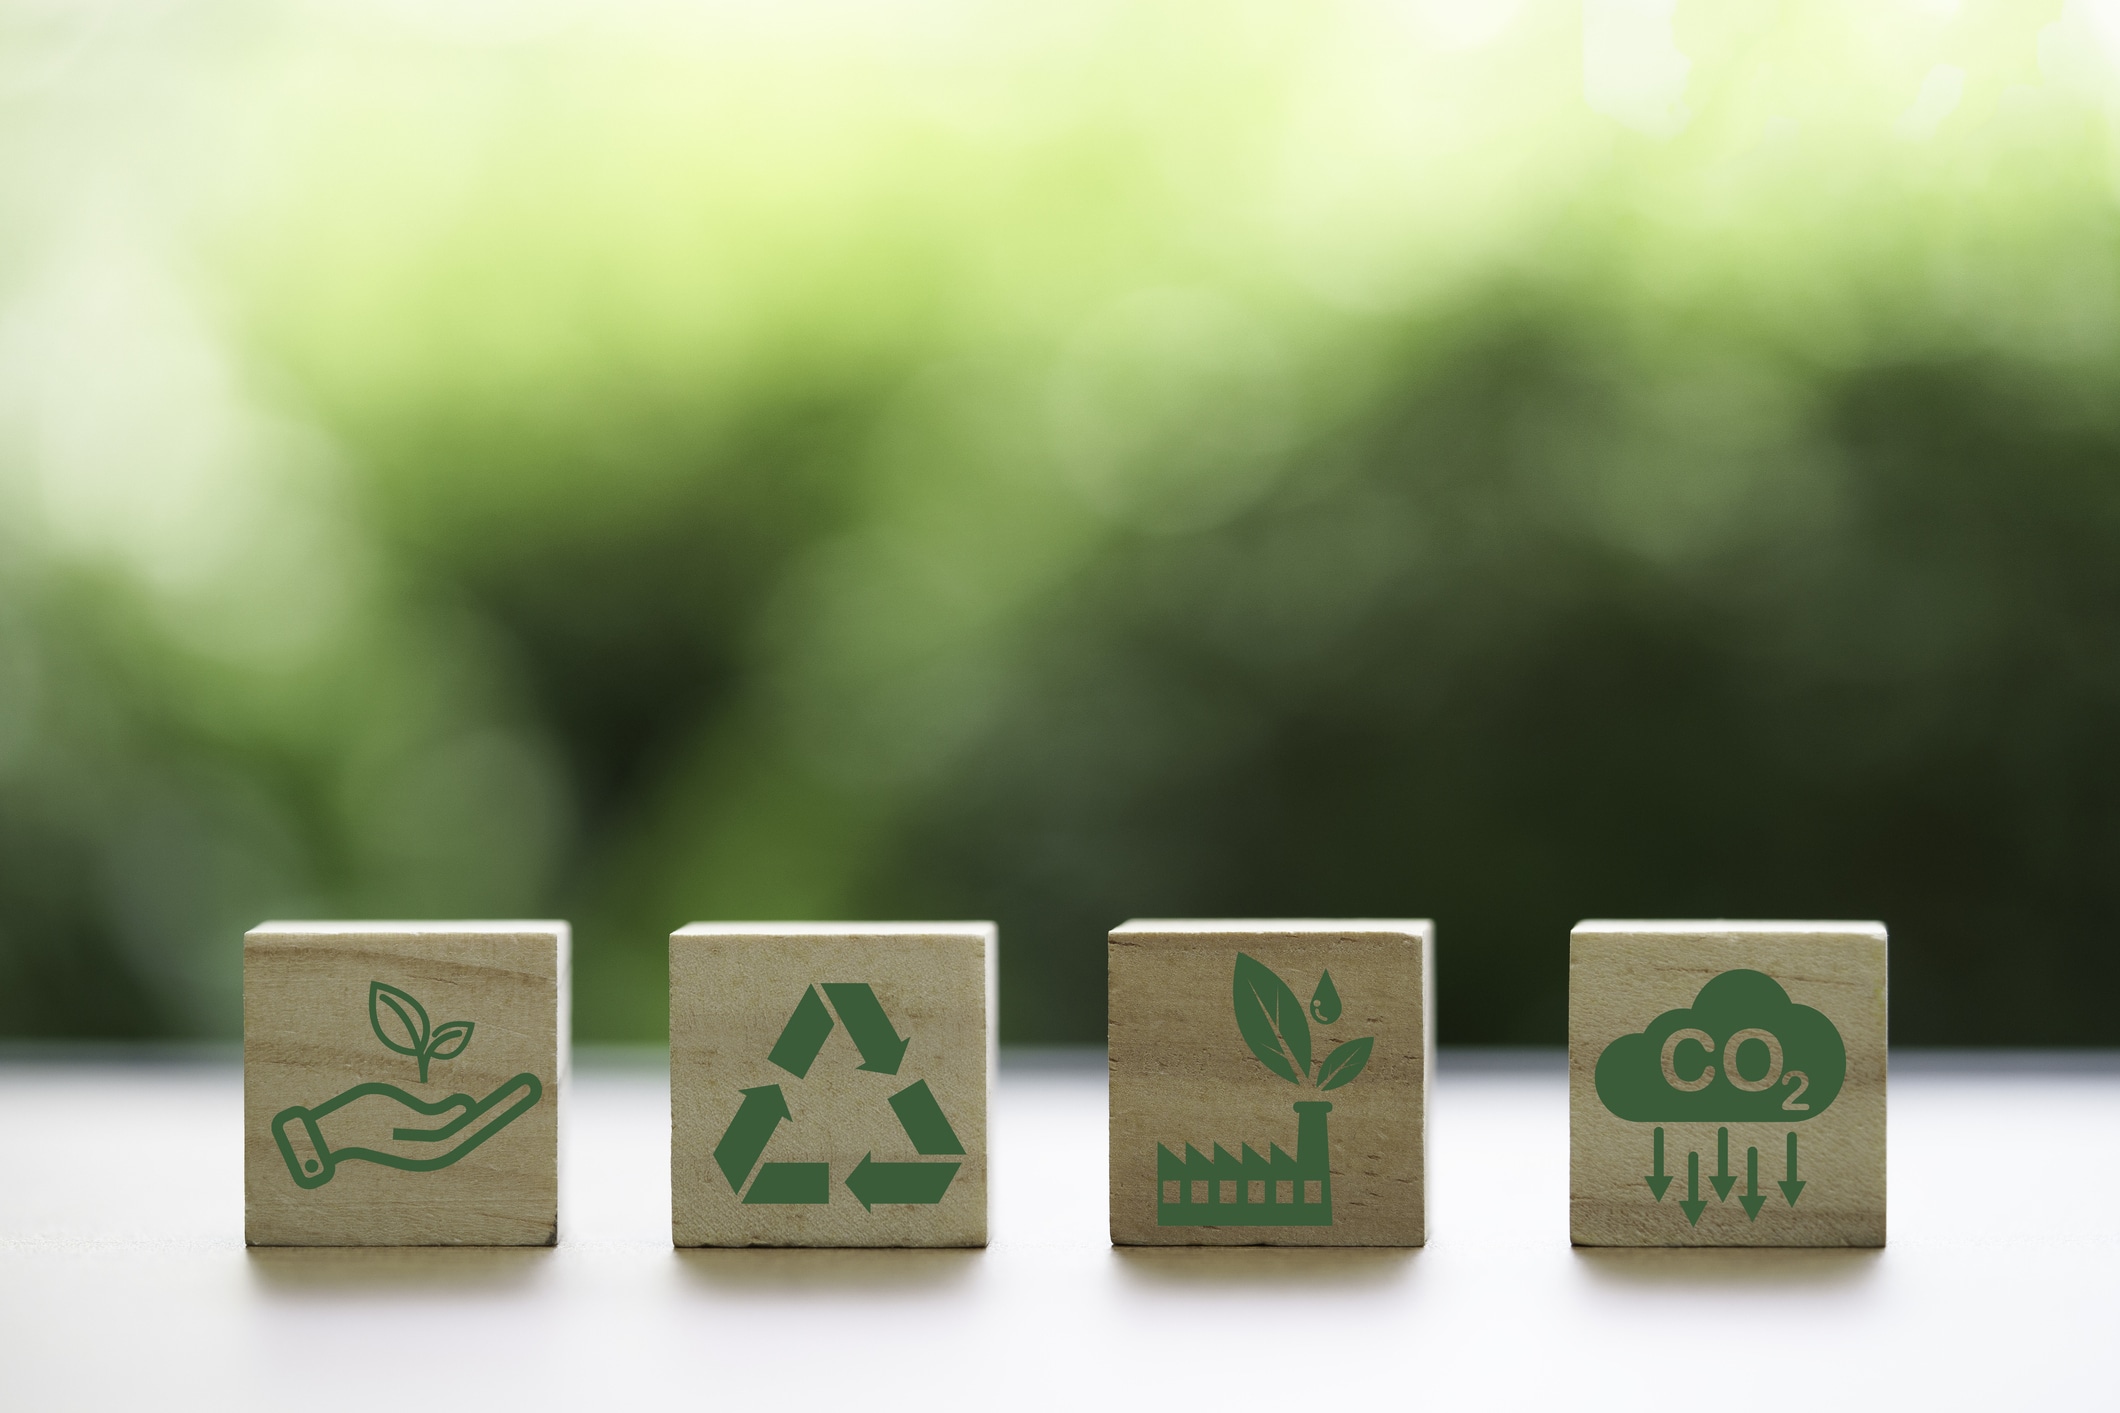 understand the need to have an eco-sustainable moving process.